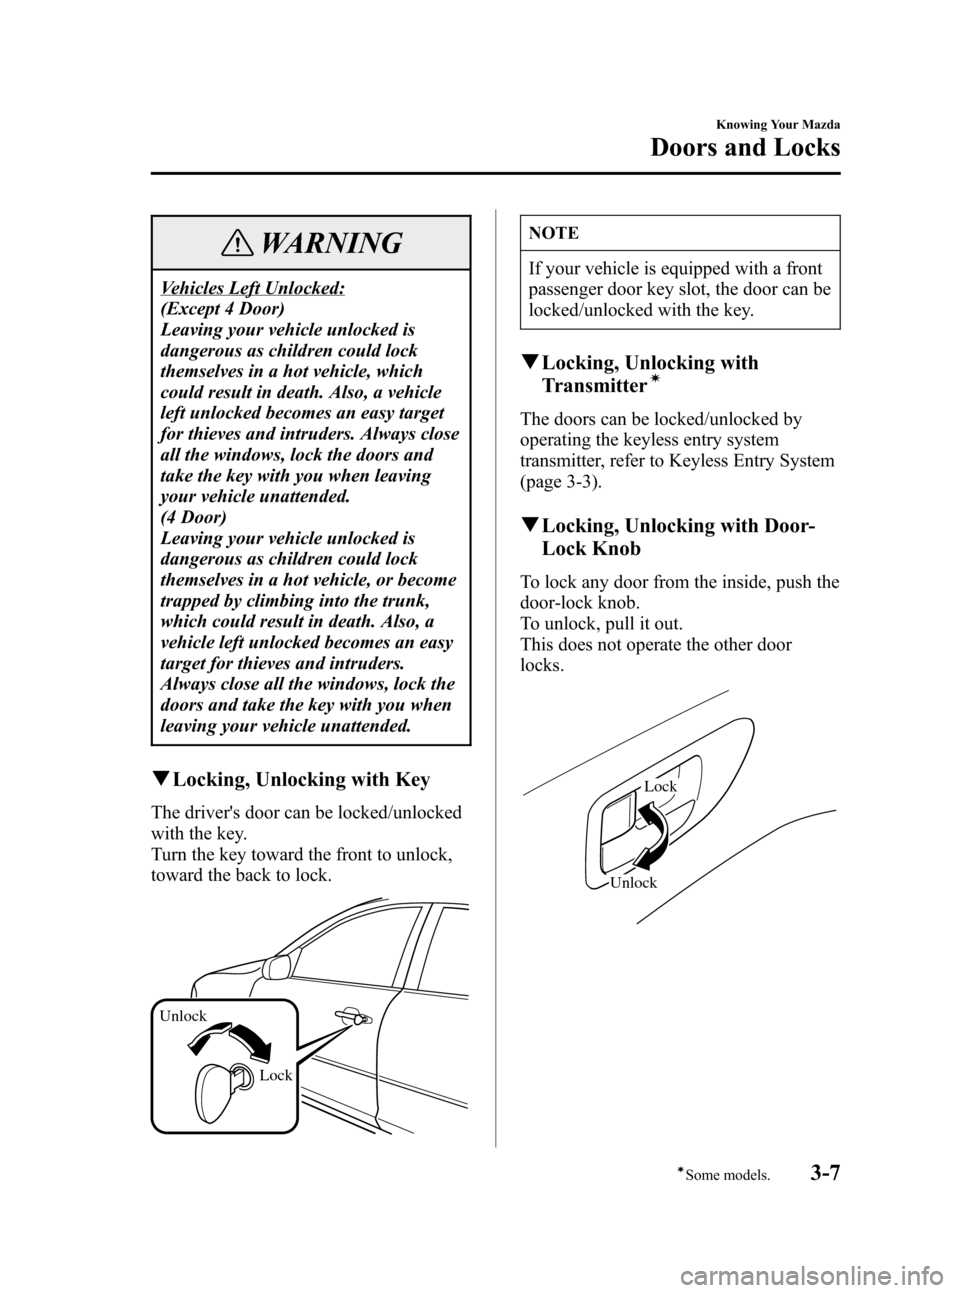 MAZDA MODEL 3 HATCHBACK 2006  Owners Manual (in English) Black plate (77,1)
WARNING
Vehicles Left Unlocked:
(Except 4 Door)
Leaving your vehicle unlocked is
dangerous as children could lock
themselves in a hot vehicle, which
could result in death. Also, a v